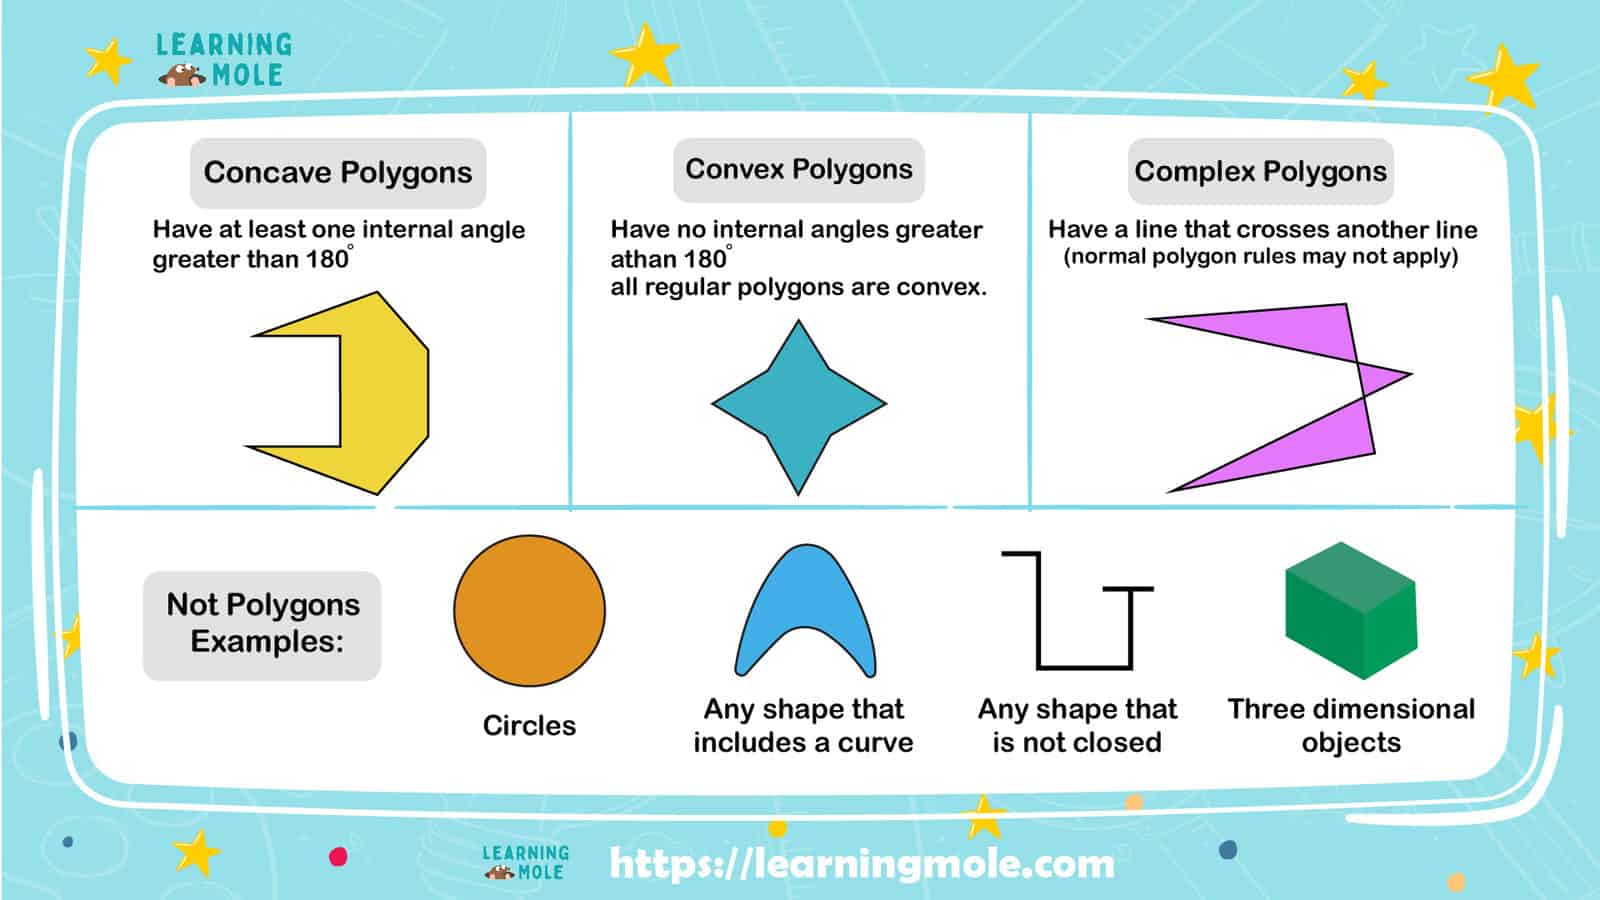 What is an Irregular Polygon?